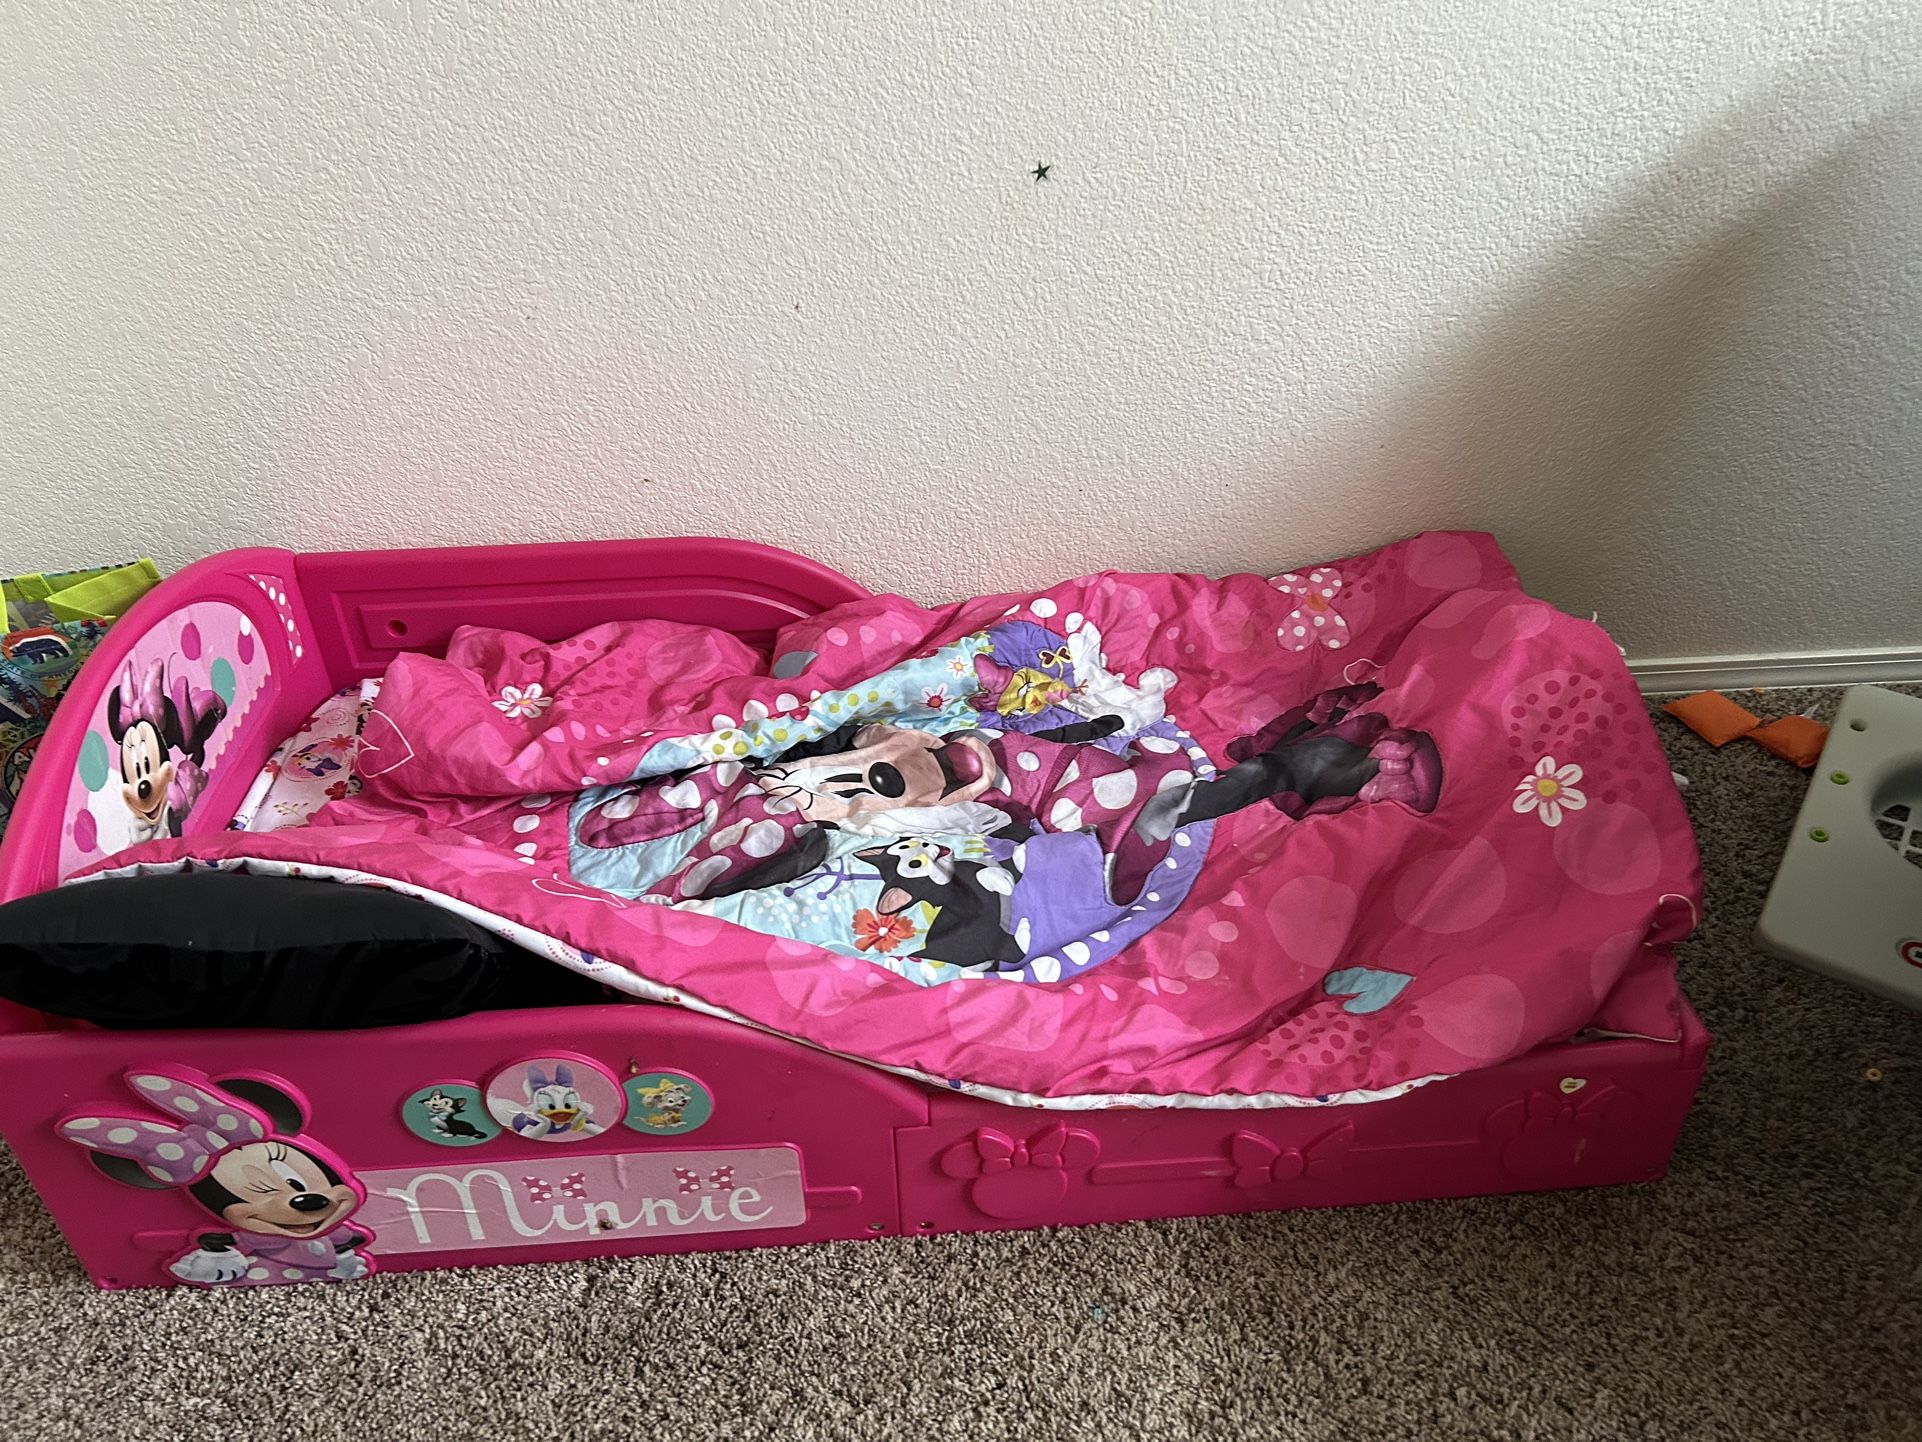 Minnie mouse bed